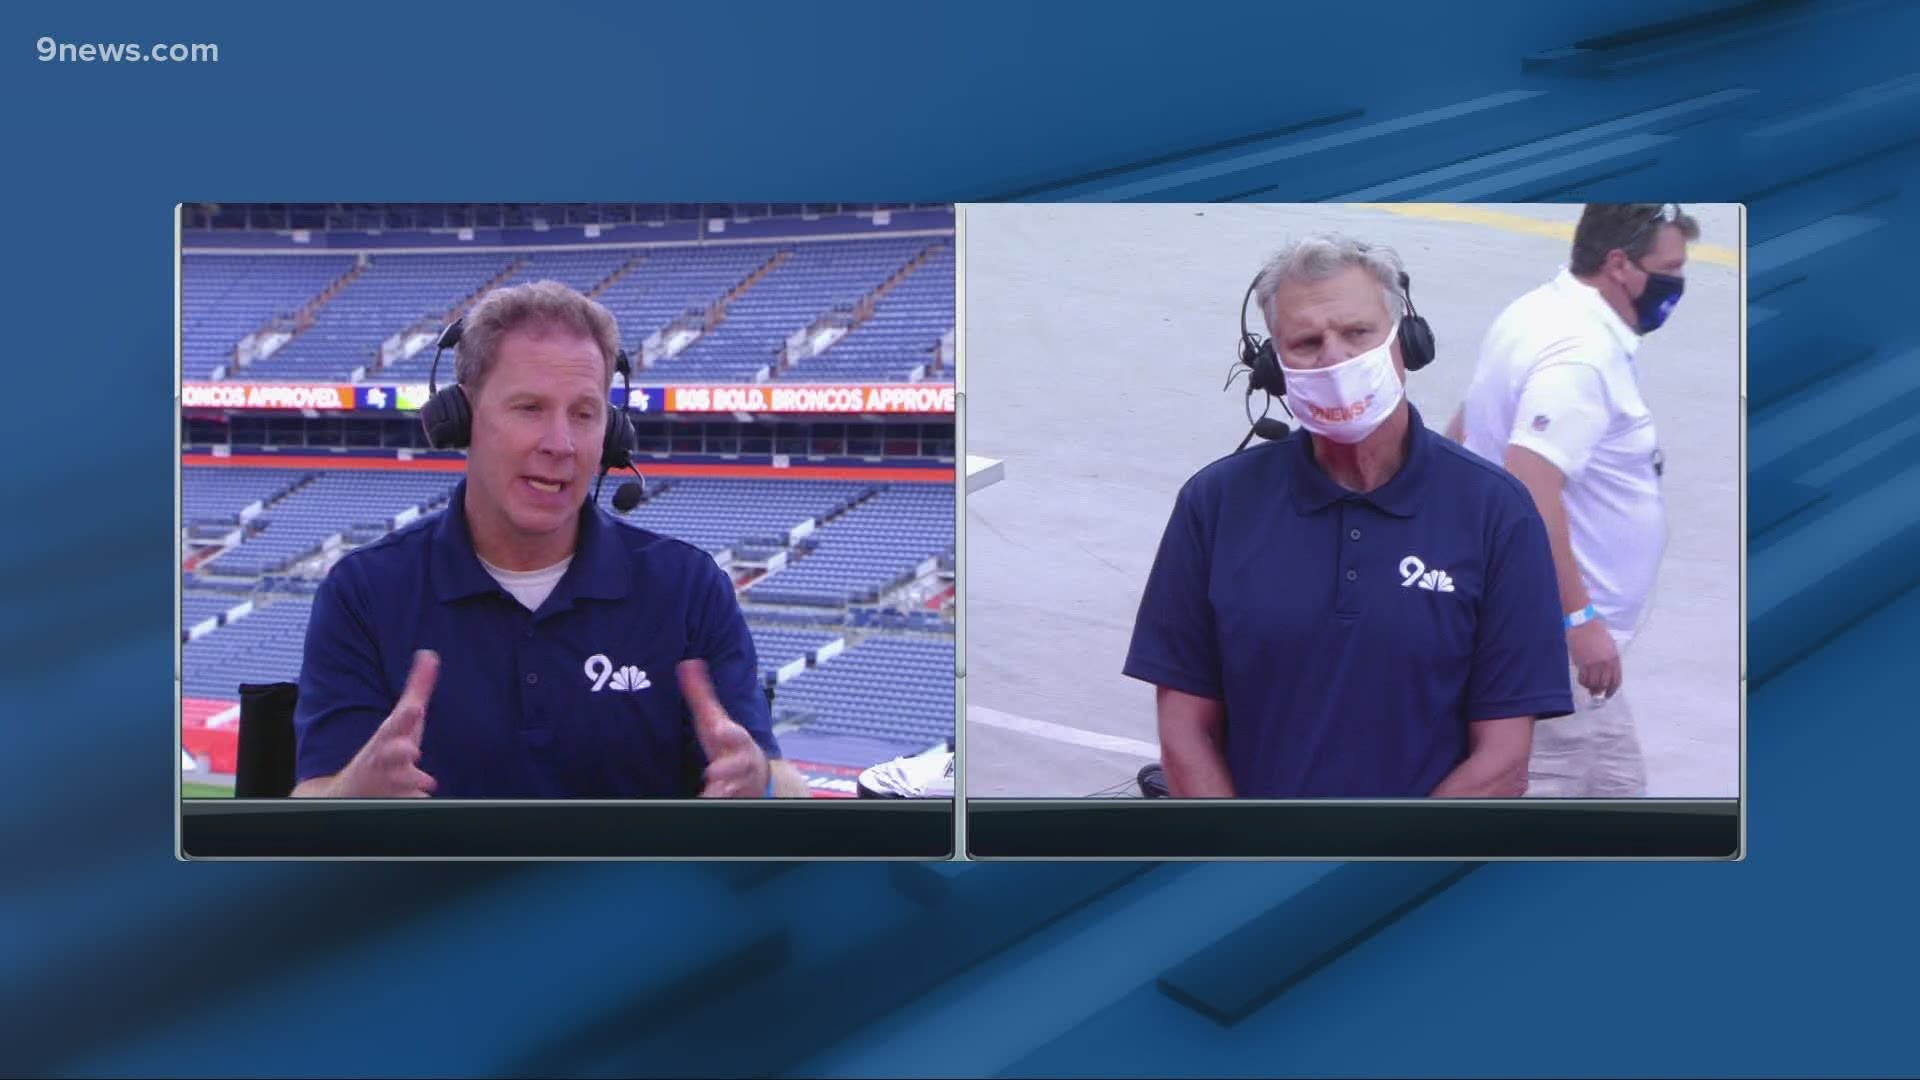 Rod Mackey and Mike Klis discuss the Denver Broncos' practice at Empower Field at Mile High on Saturday.